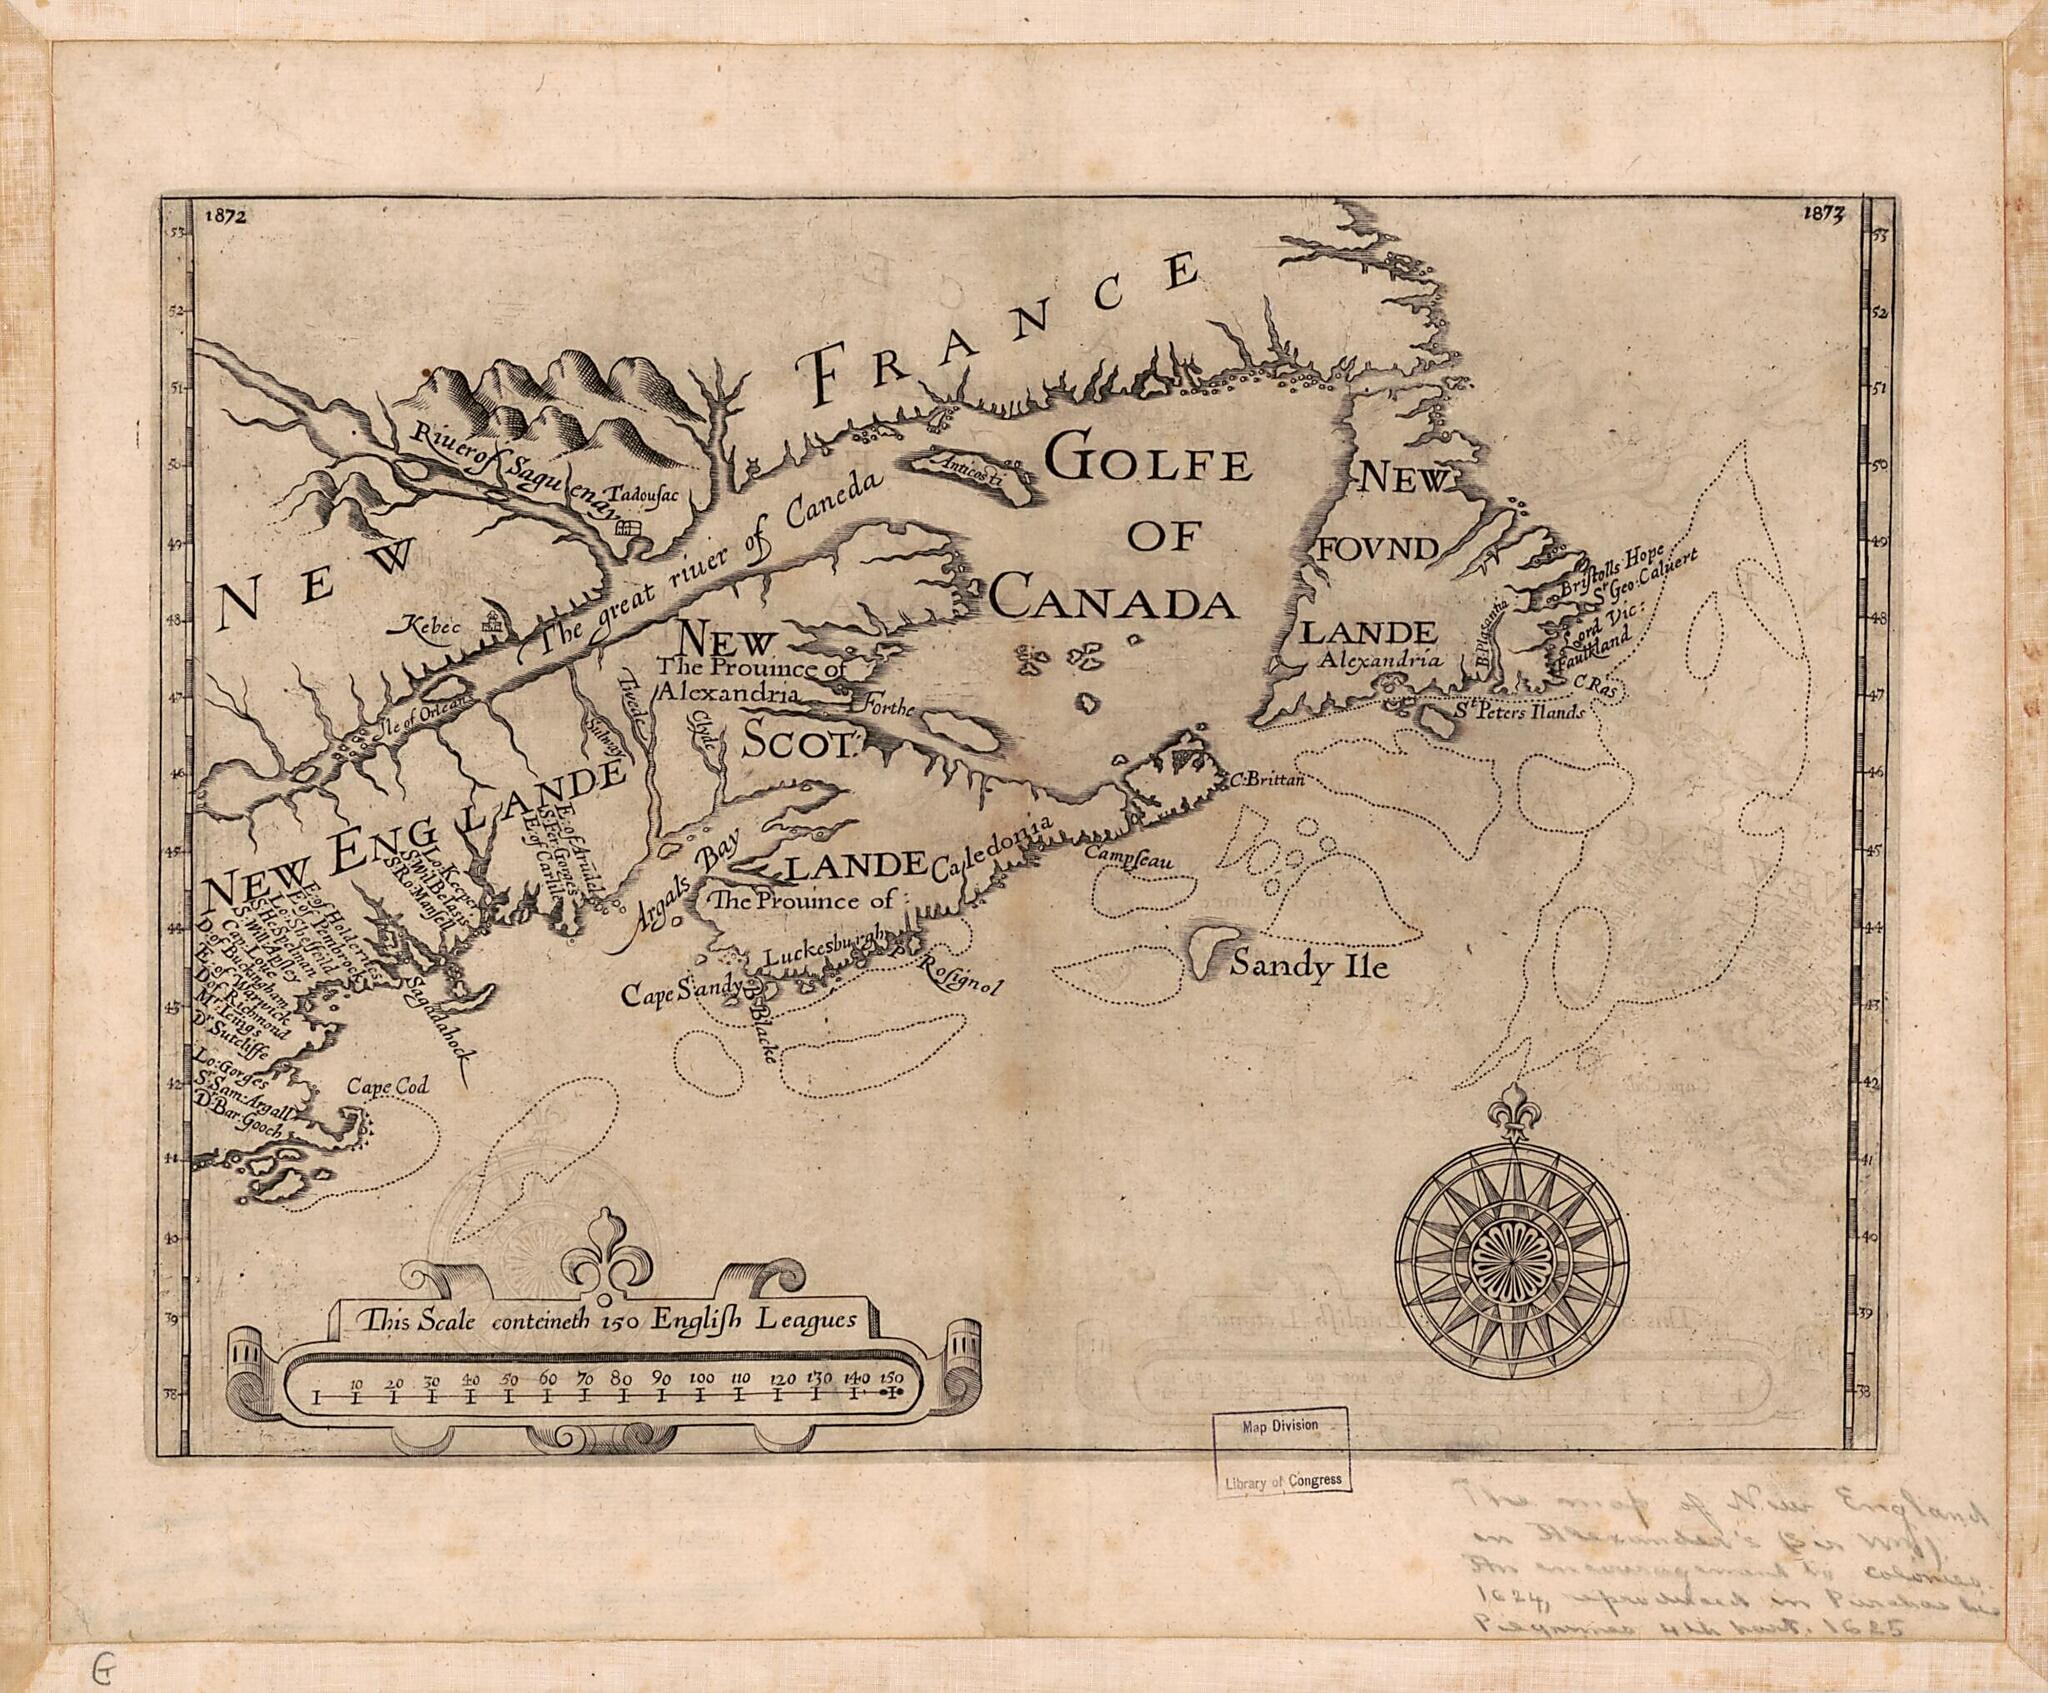 This old map of New England, Nova Scotia, and Newfoundland from 1624 was created by William Alexander Stirling in 1624